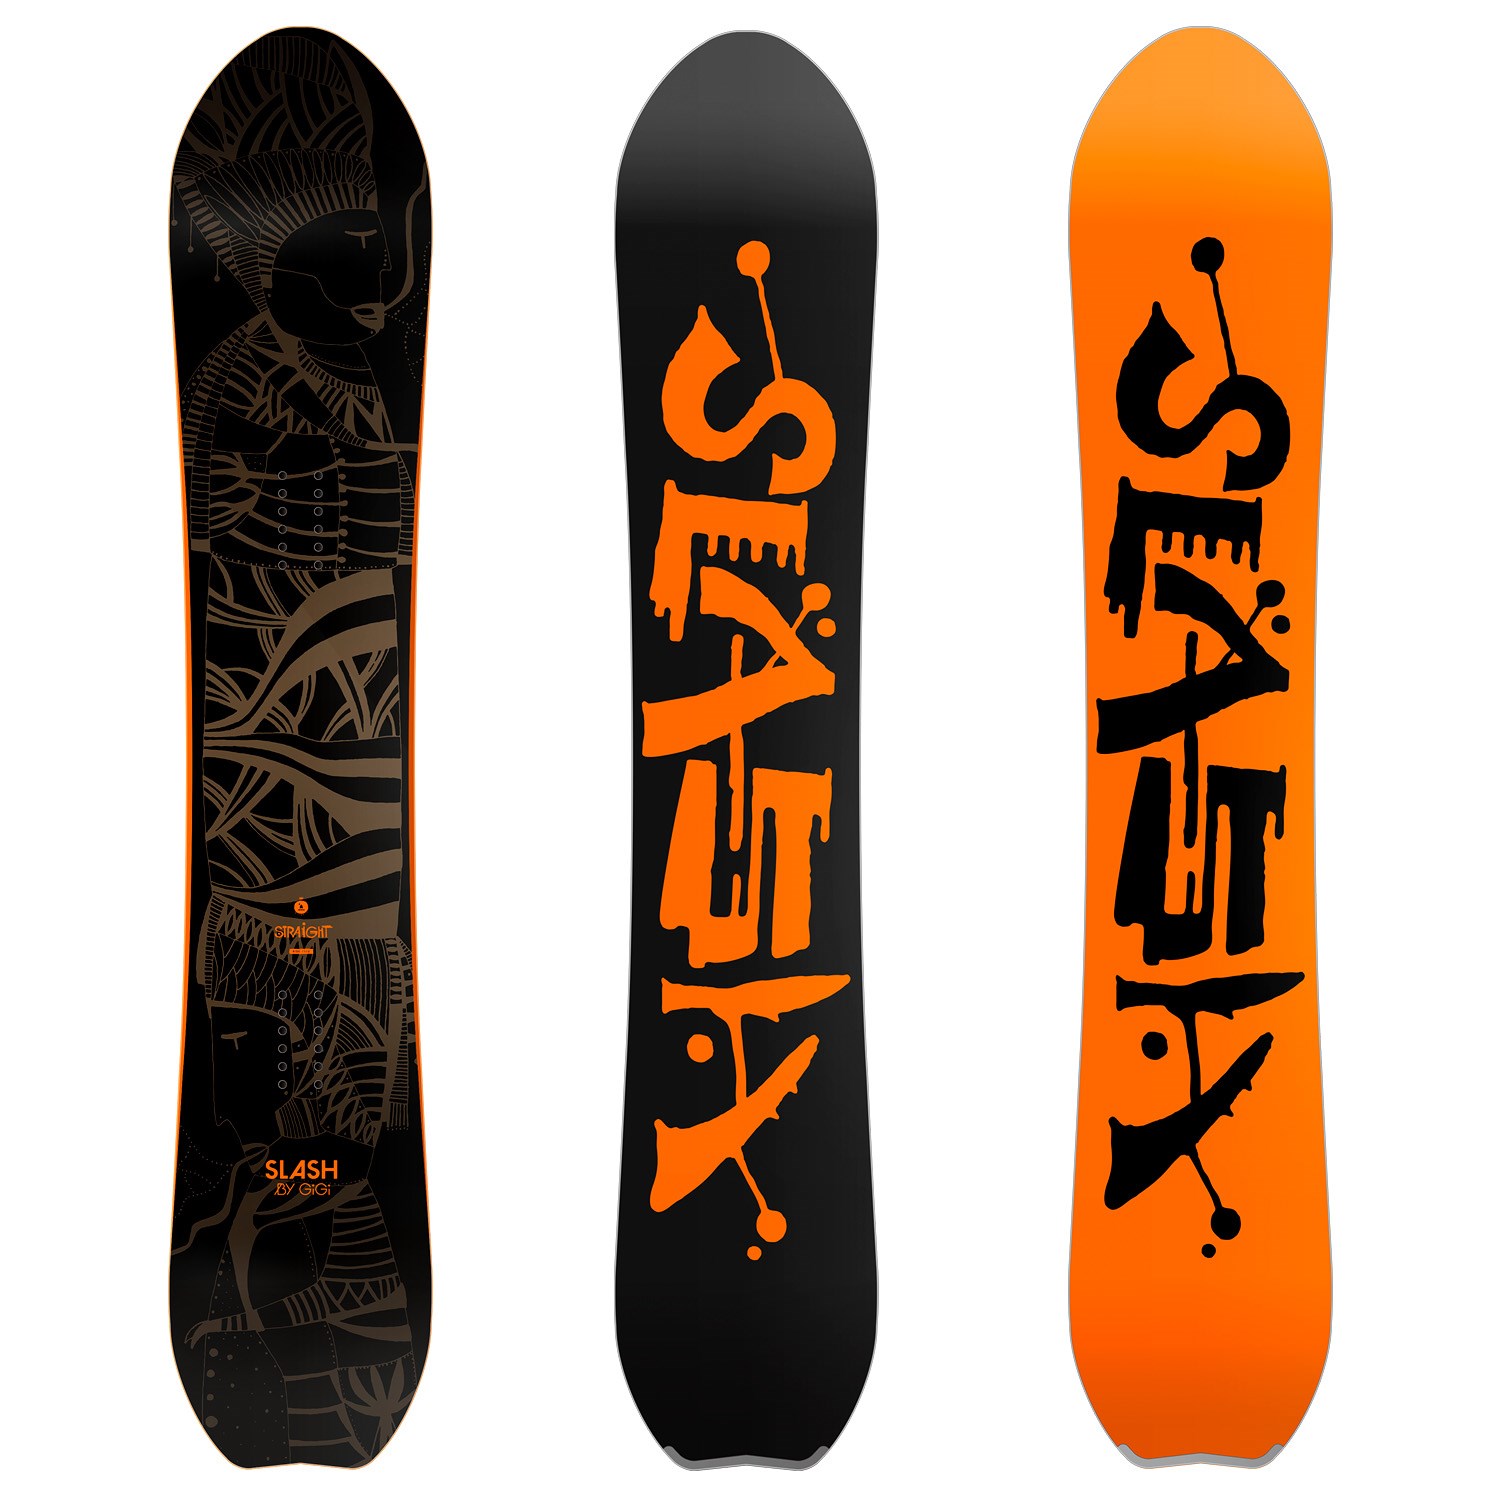 Slash Straight Snowboard 2015 Evo within how to snowboard in a straight line for Home